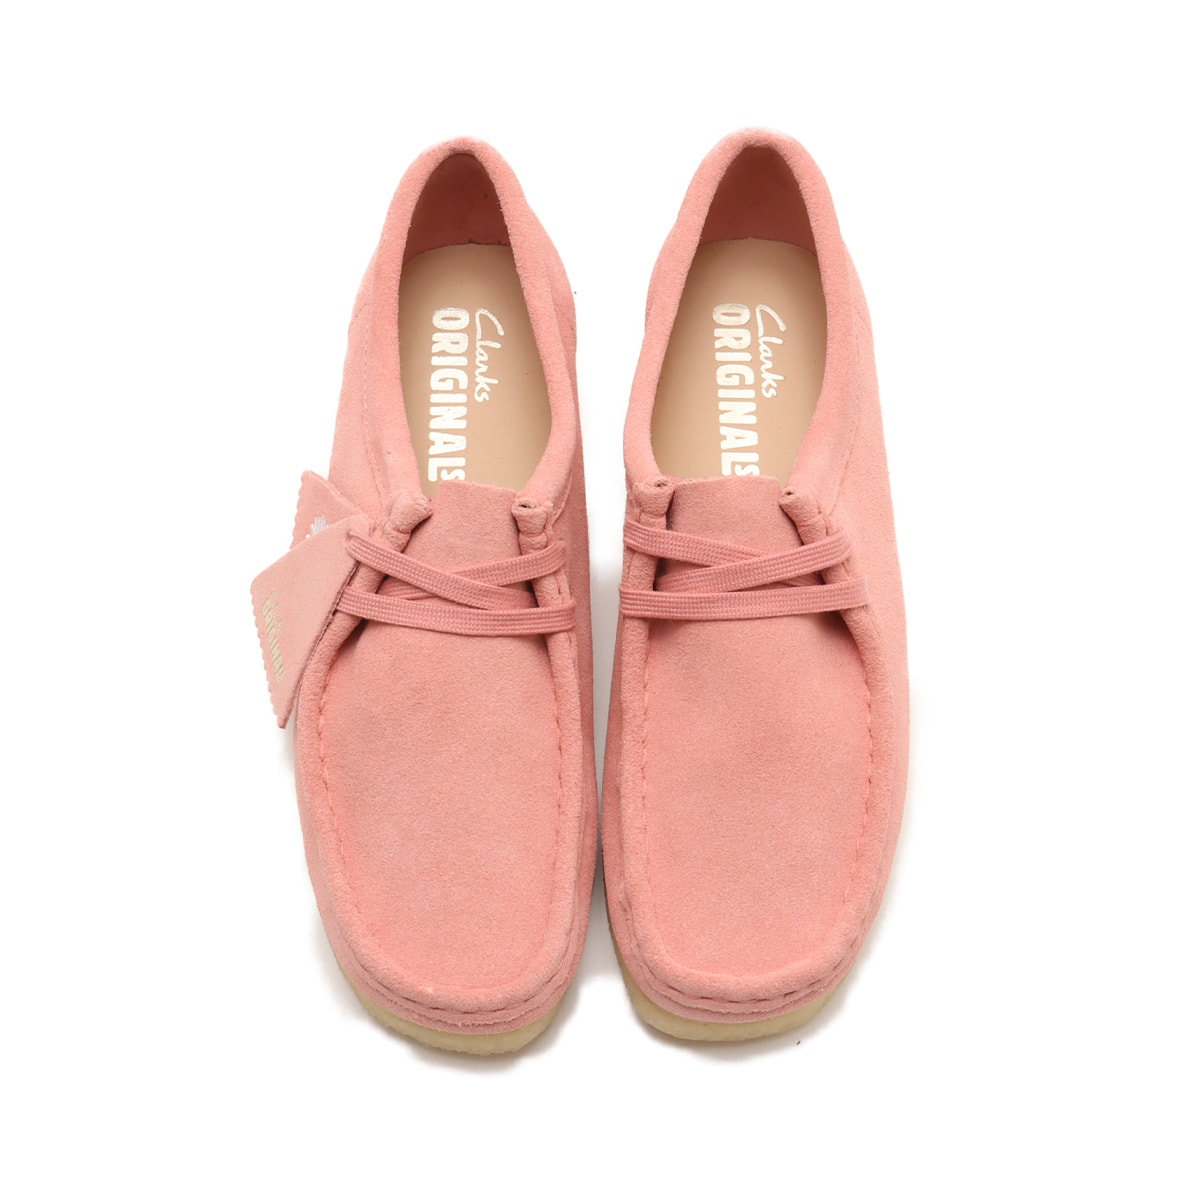 CLARKS Wallabee Blush Pink Suede 24SP-I